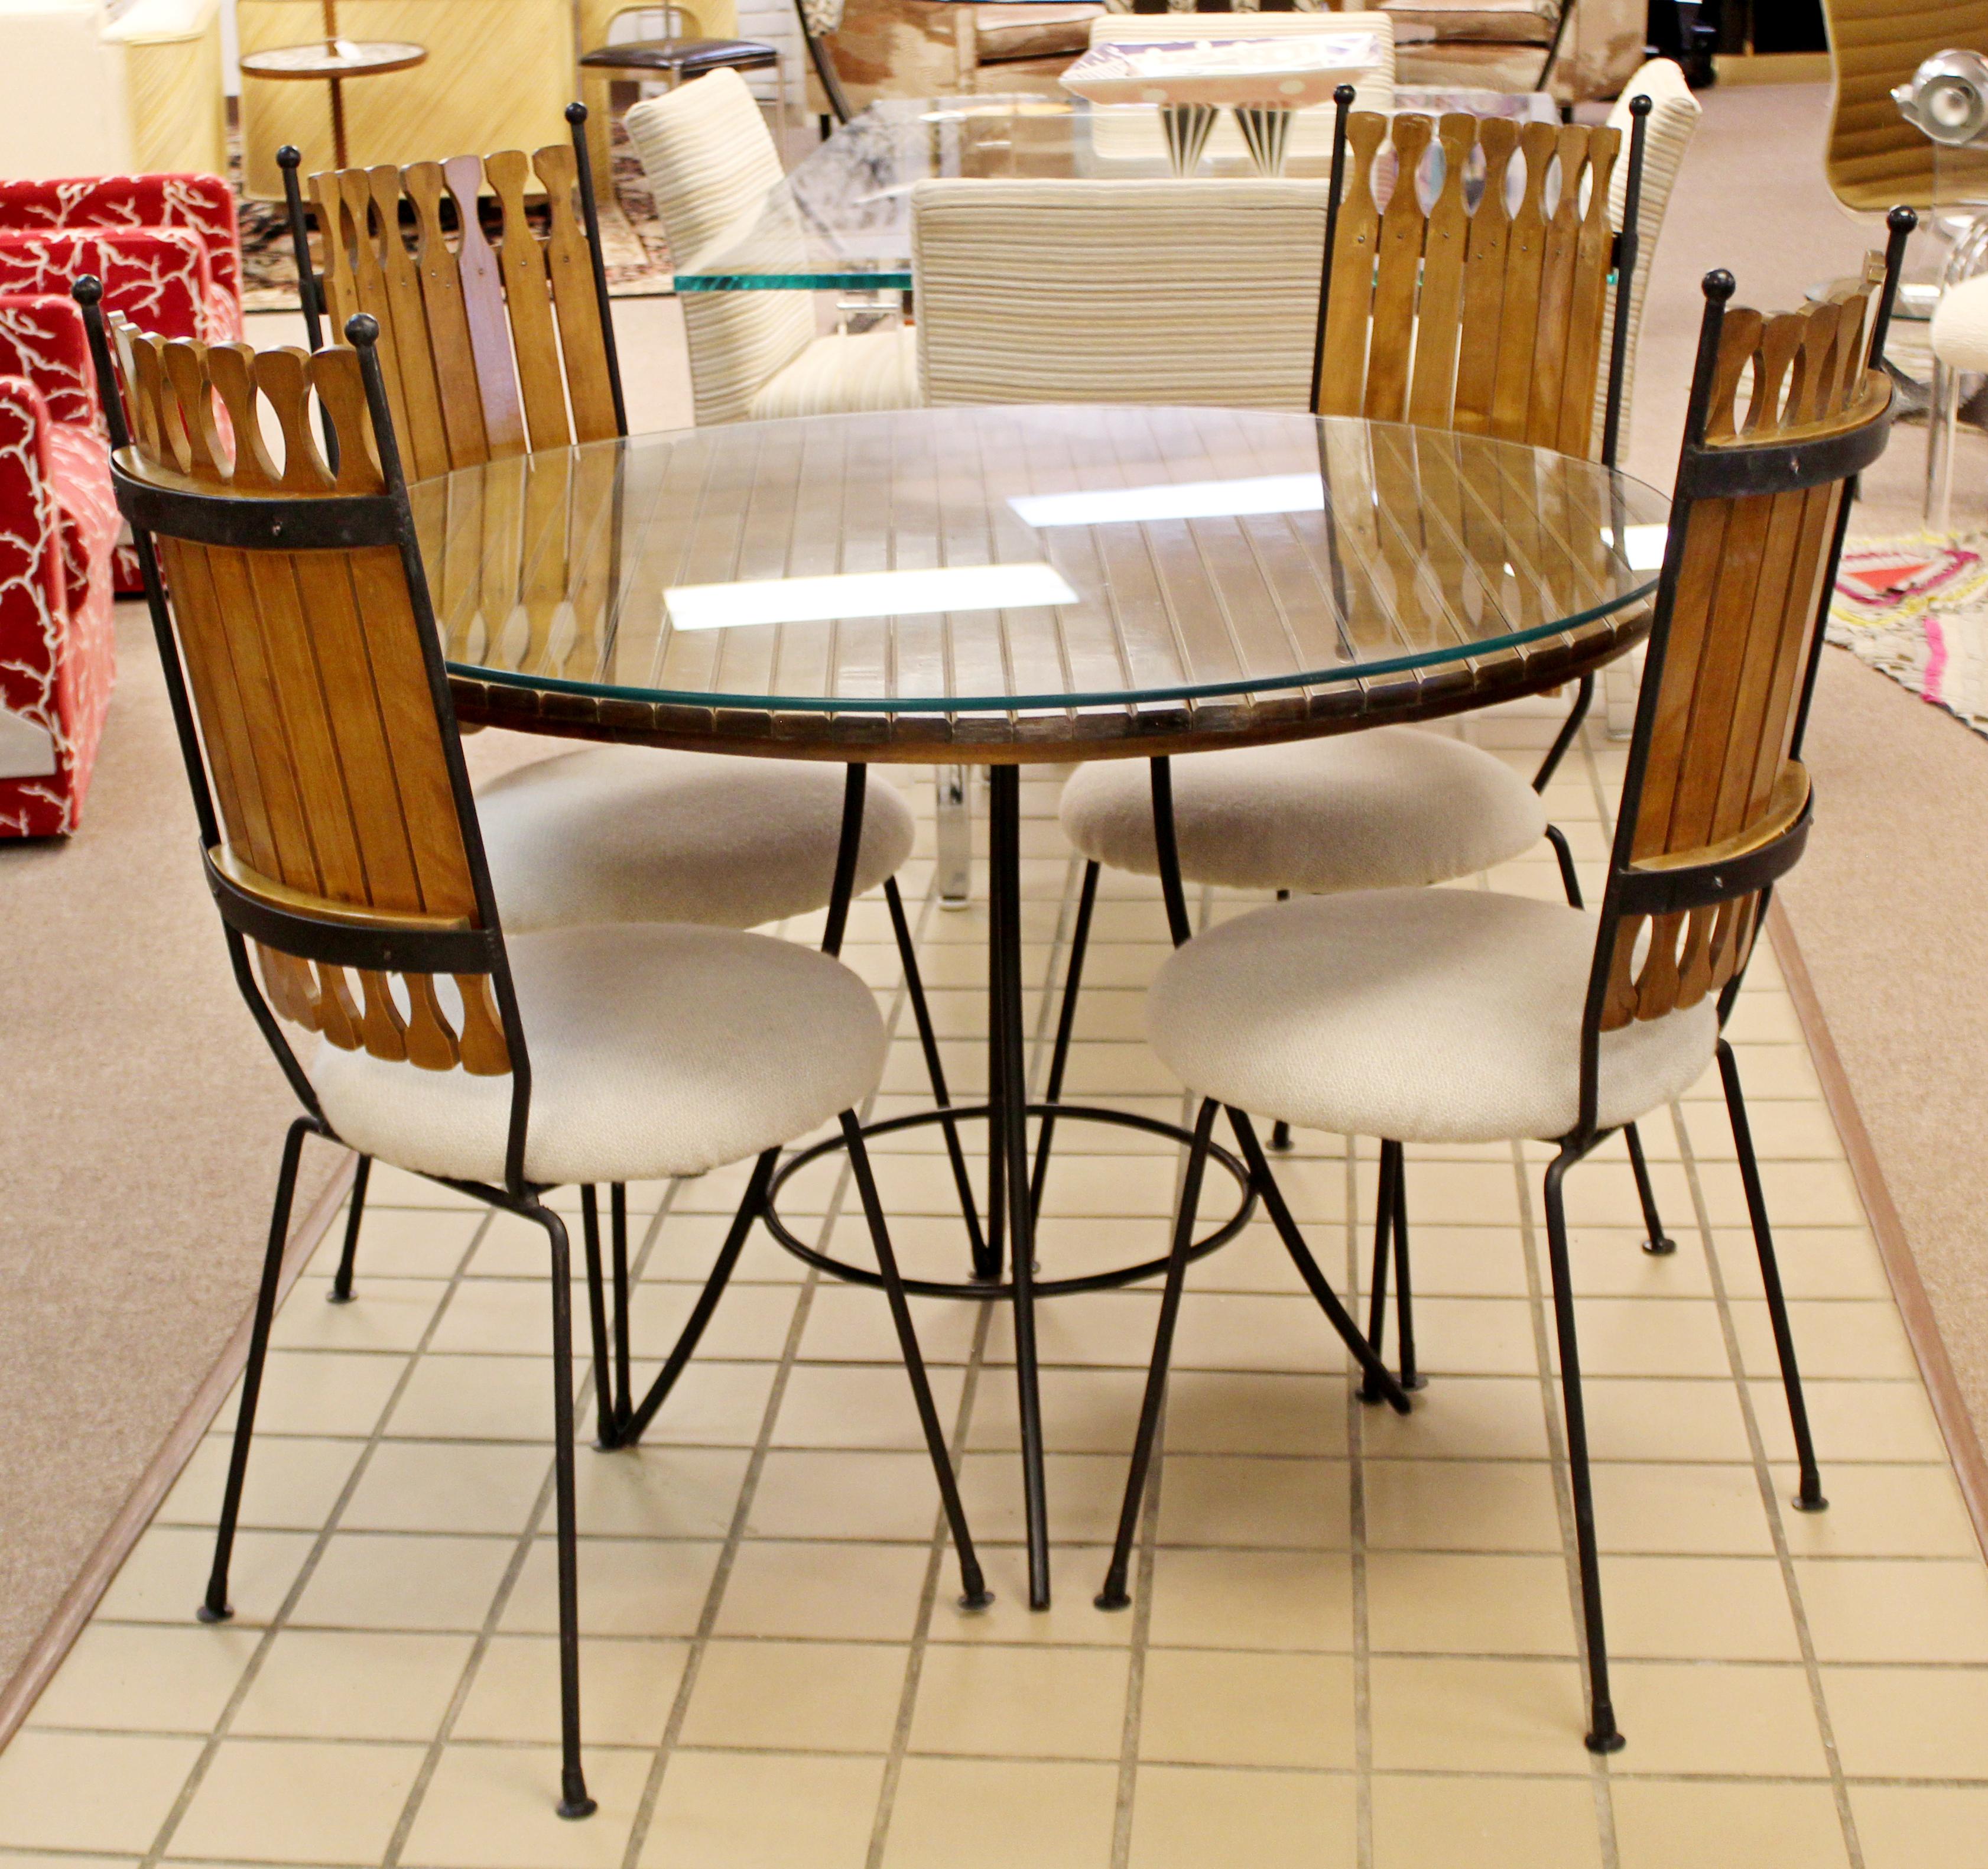 For your consideration is a spectacular dinette set, including four iron side chairs, and an iron and wood slat table with a glass top, by Arthur Umanoff, circa 1960s. In very good vintage condition. The dimensions of the table are 42